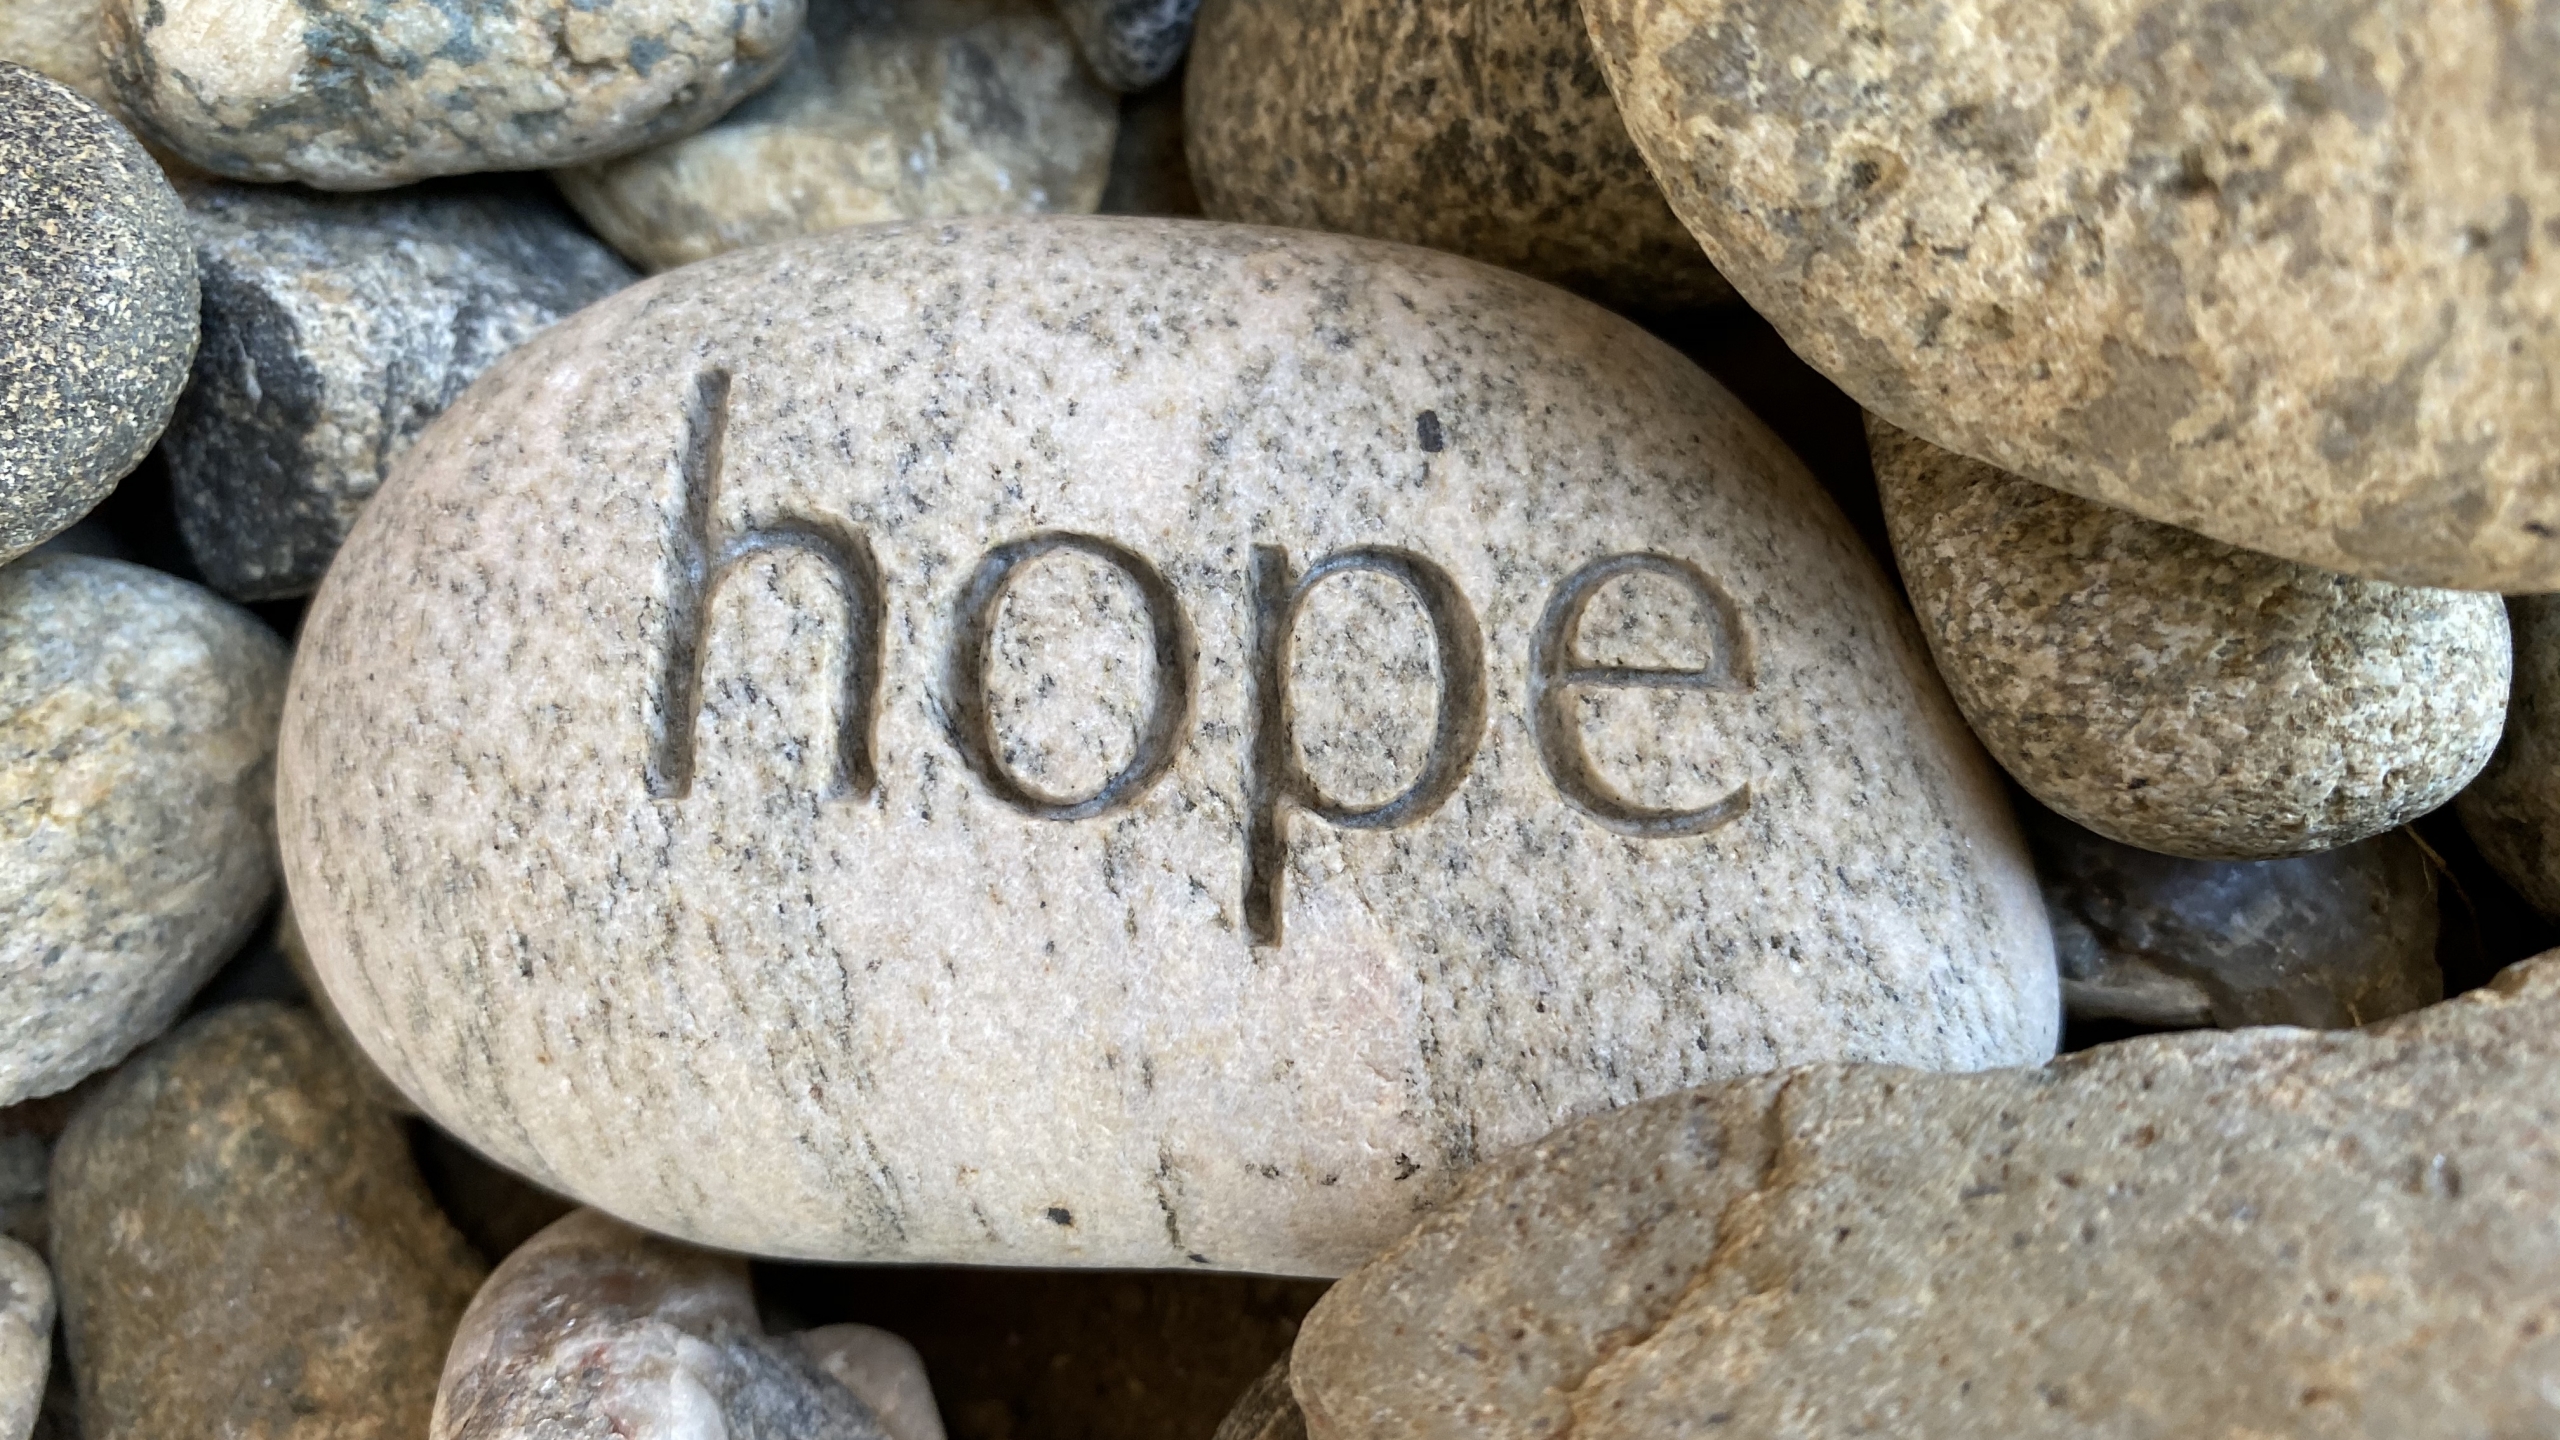 COMMENTARY – WHERE IS THE HOPE?